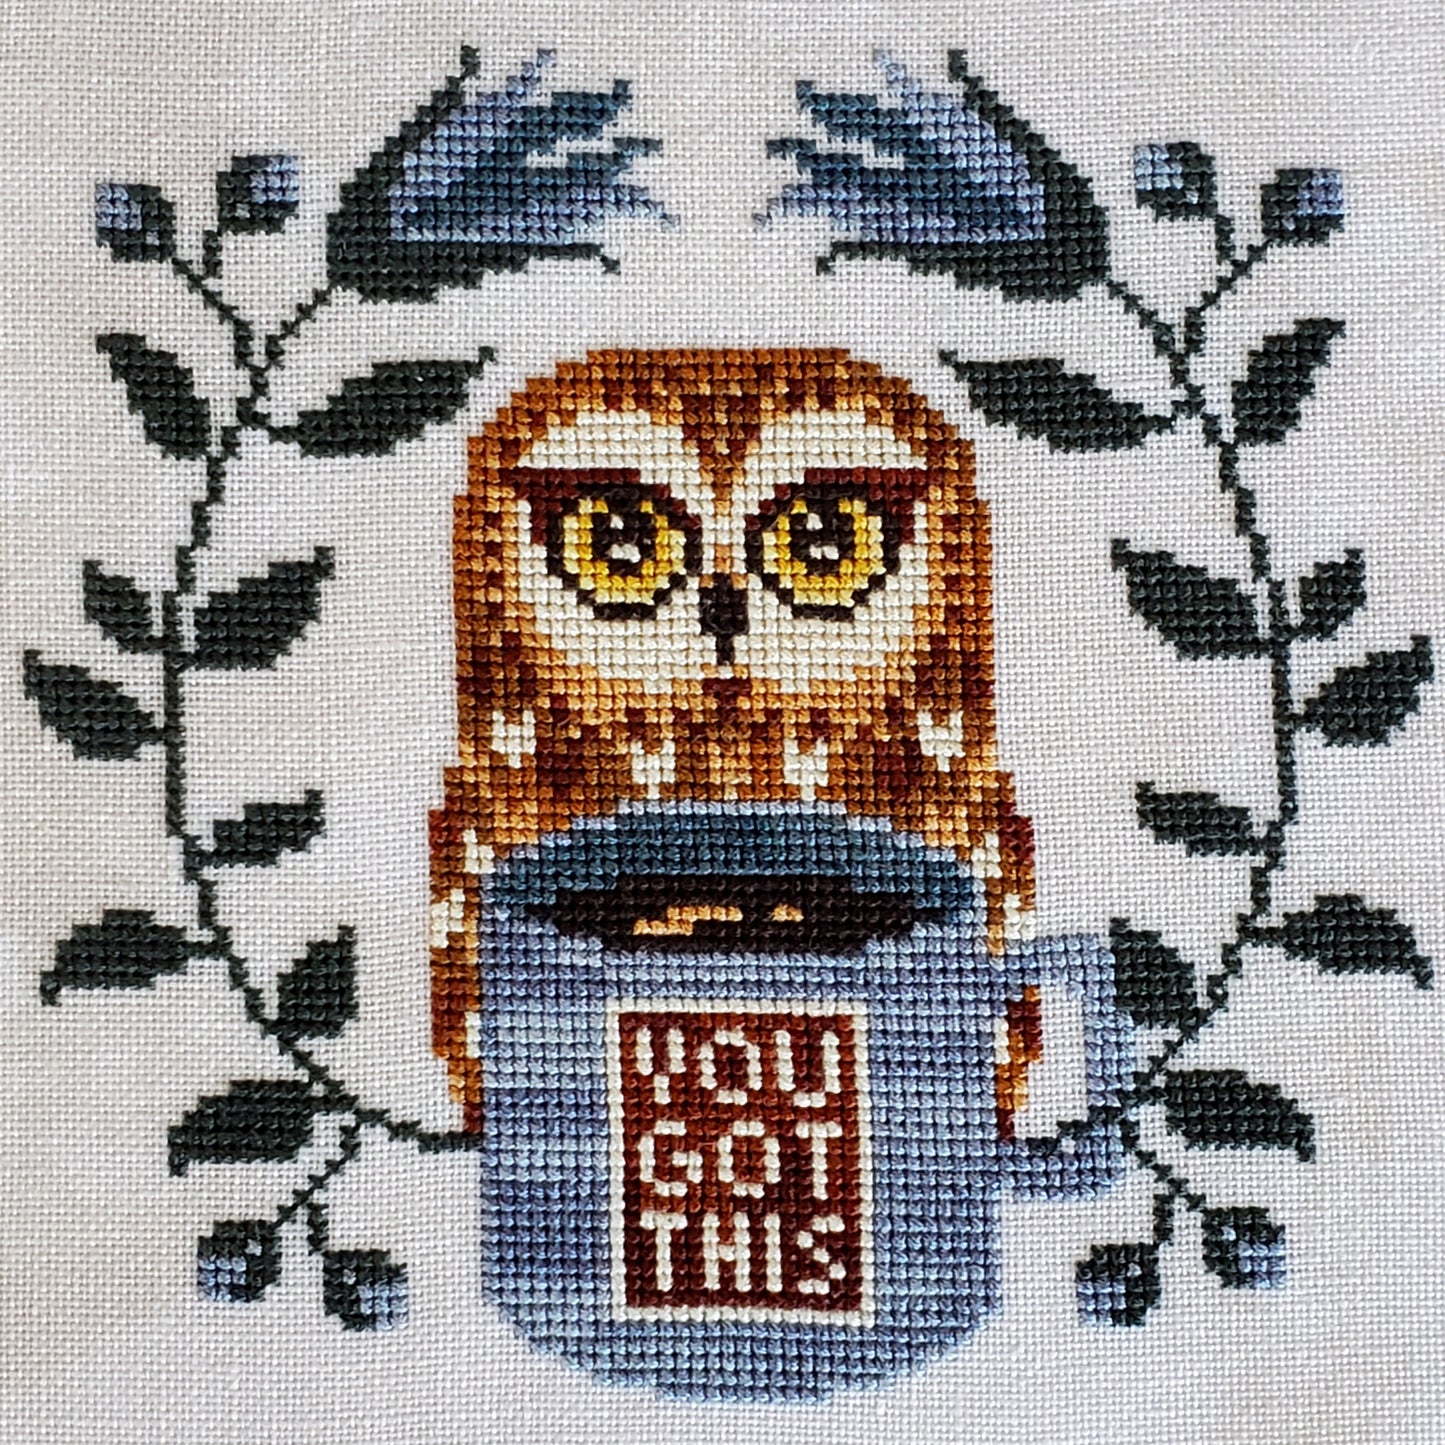 You Got This - Cross Stitch Pattern by The Artsy Housewife